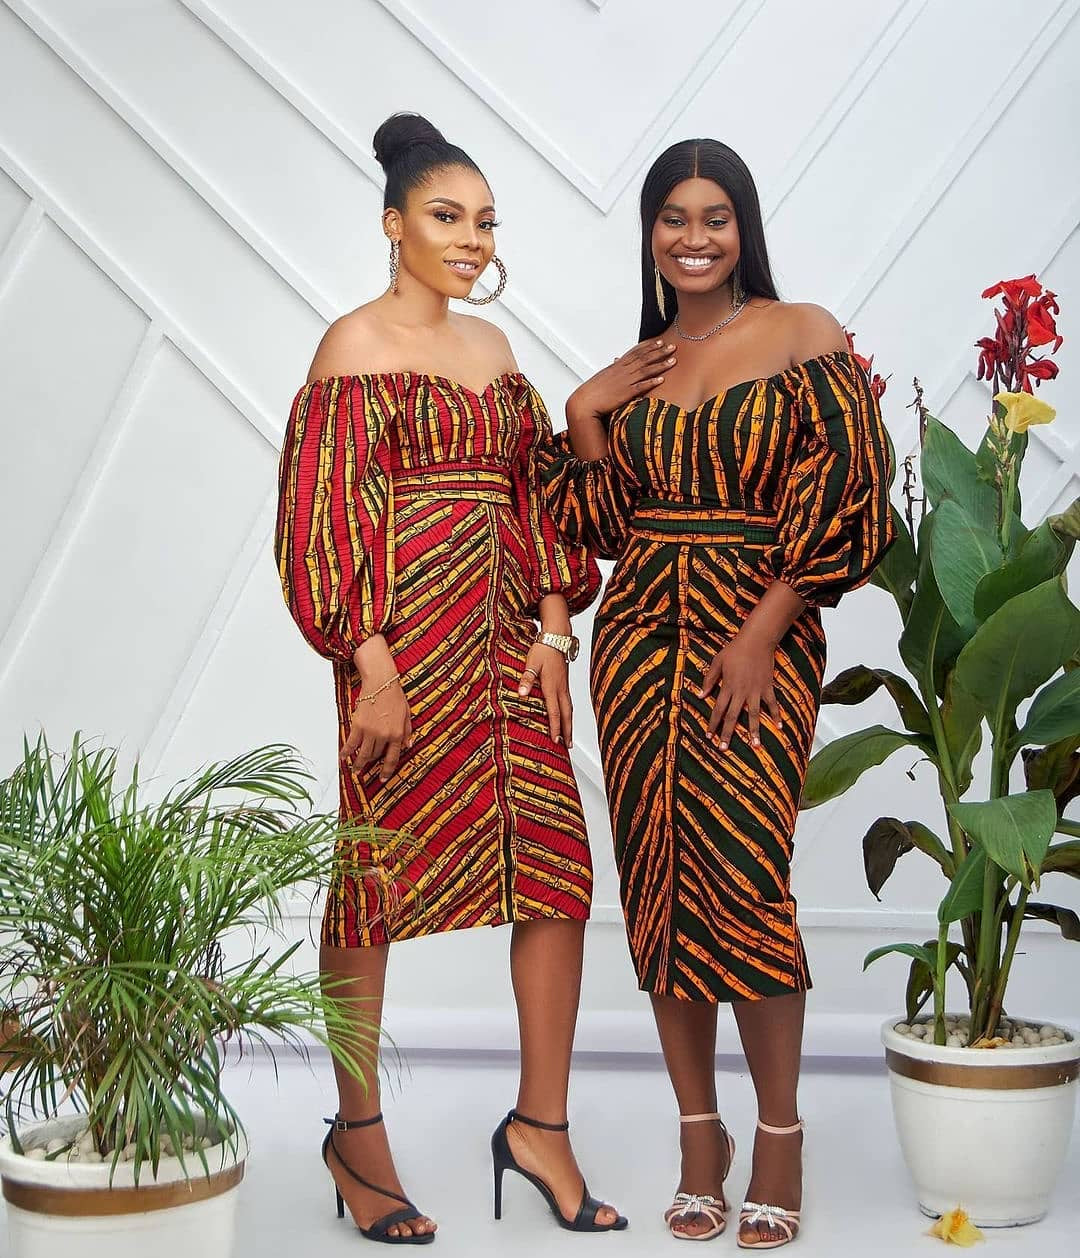 rester krone pubertet OFF SHOULDER FITTED AFRICAN ANKARA PRINT PLUS SIZE PARTY DRESS –  Africanclothinghub UK, US, Canada